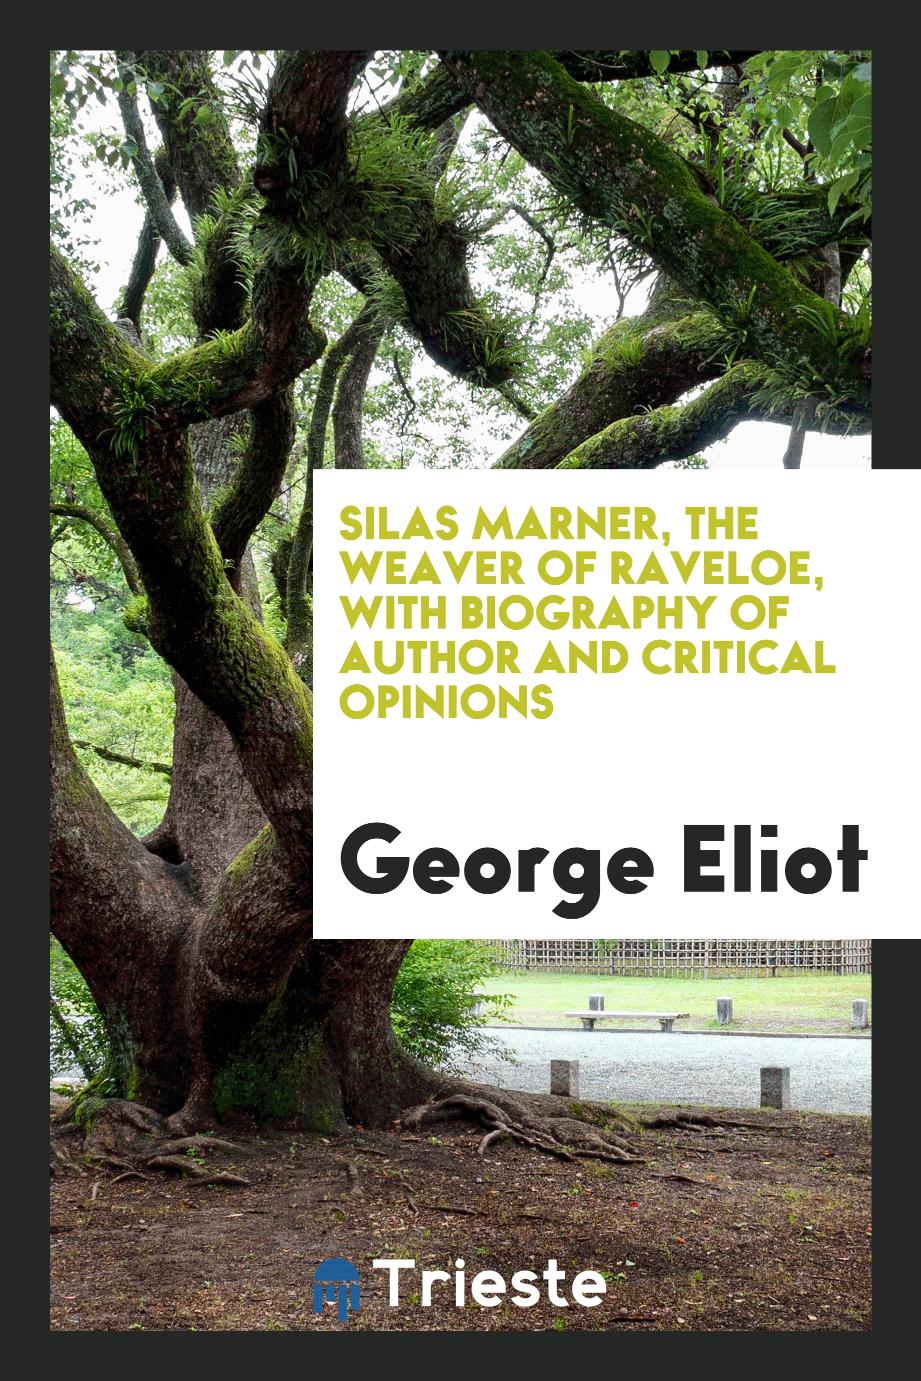 Silas Marner, the Weaver of Raveloe, with Biography of Author and Critical Opinions